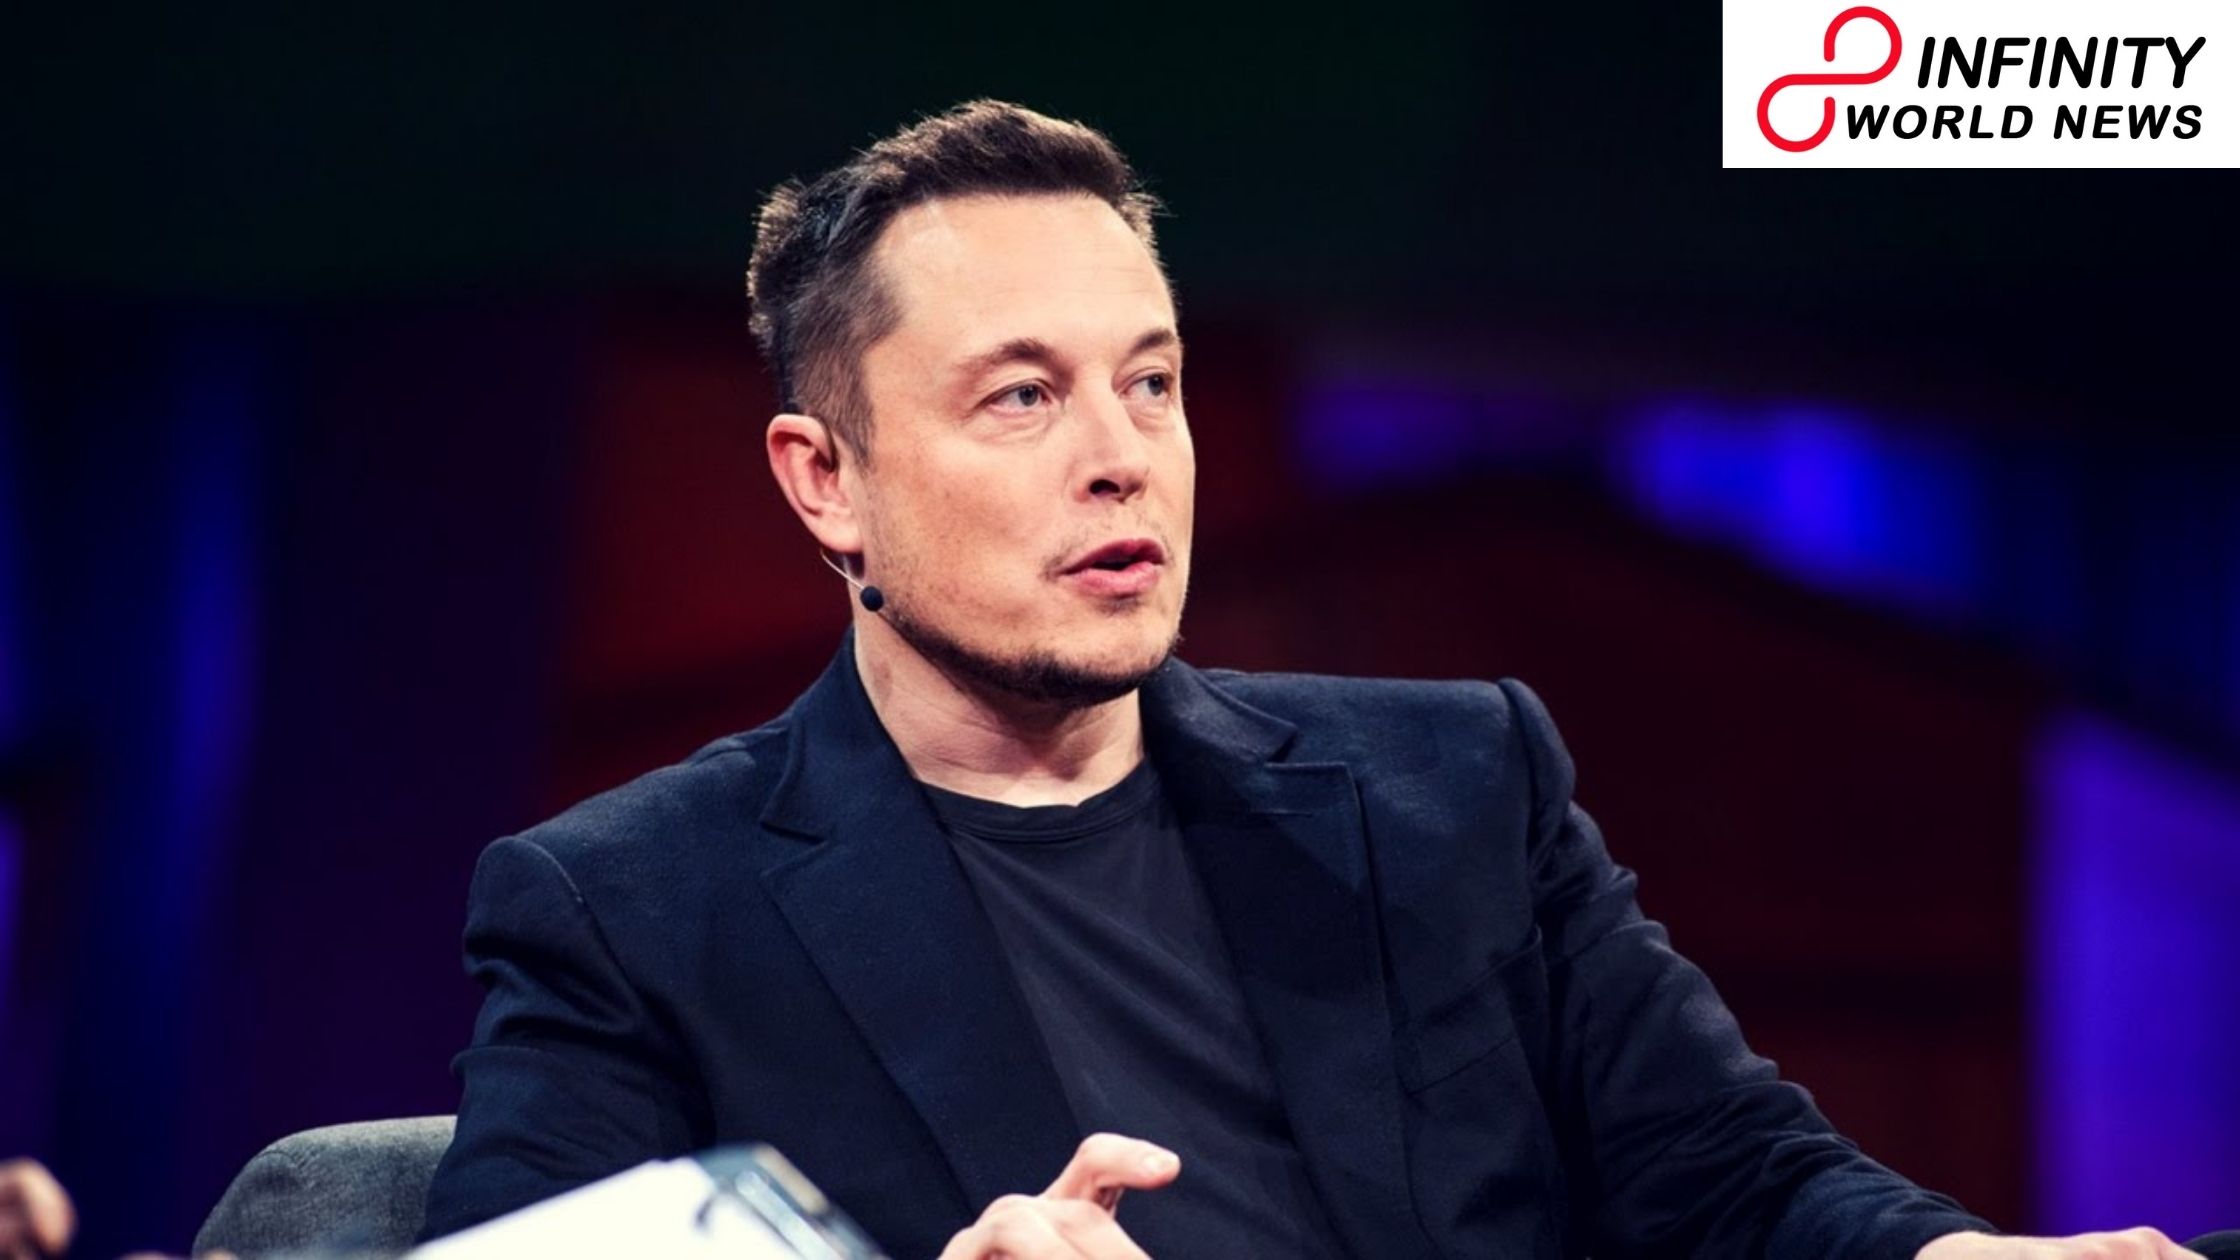 Tesla will reveal 'many energizing things' at Battery Day occasion on September 22, says CEO Elon Musk